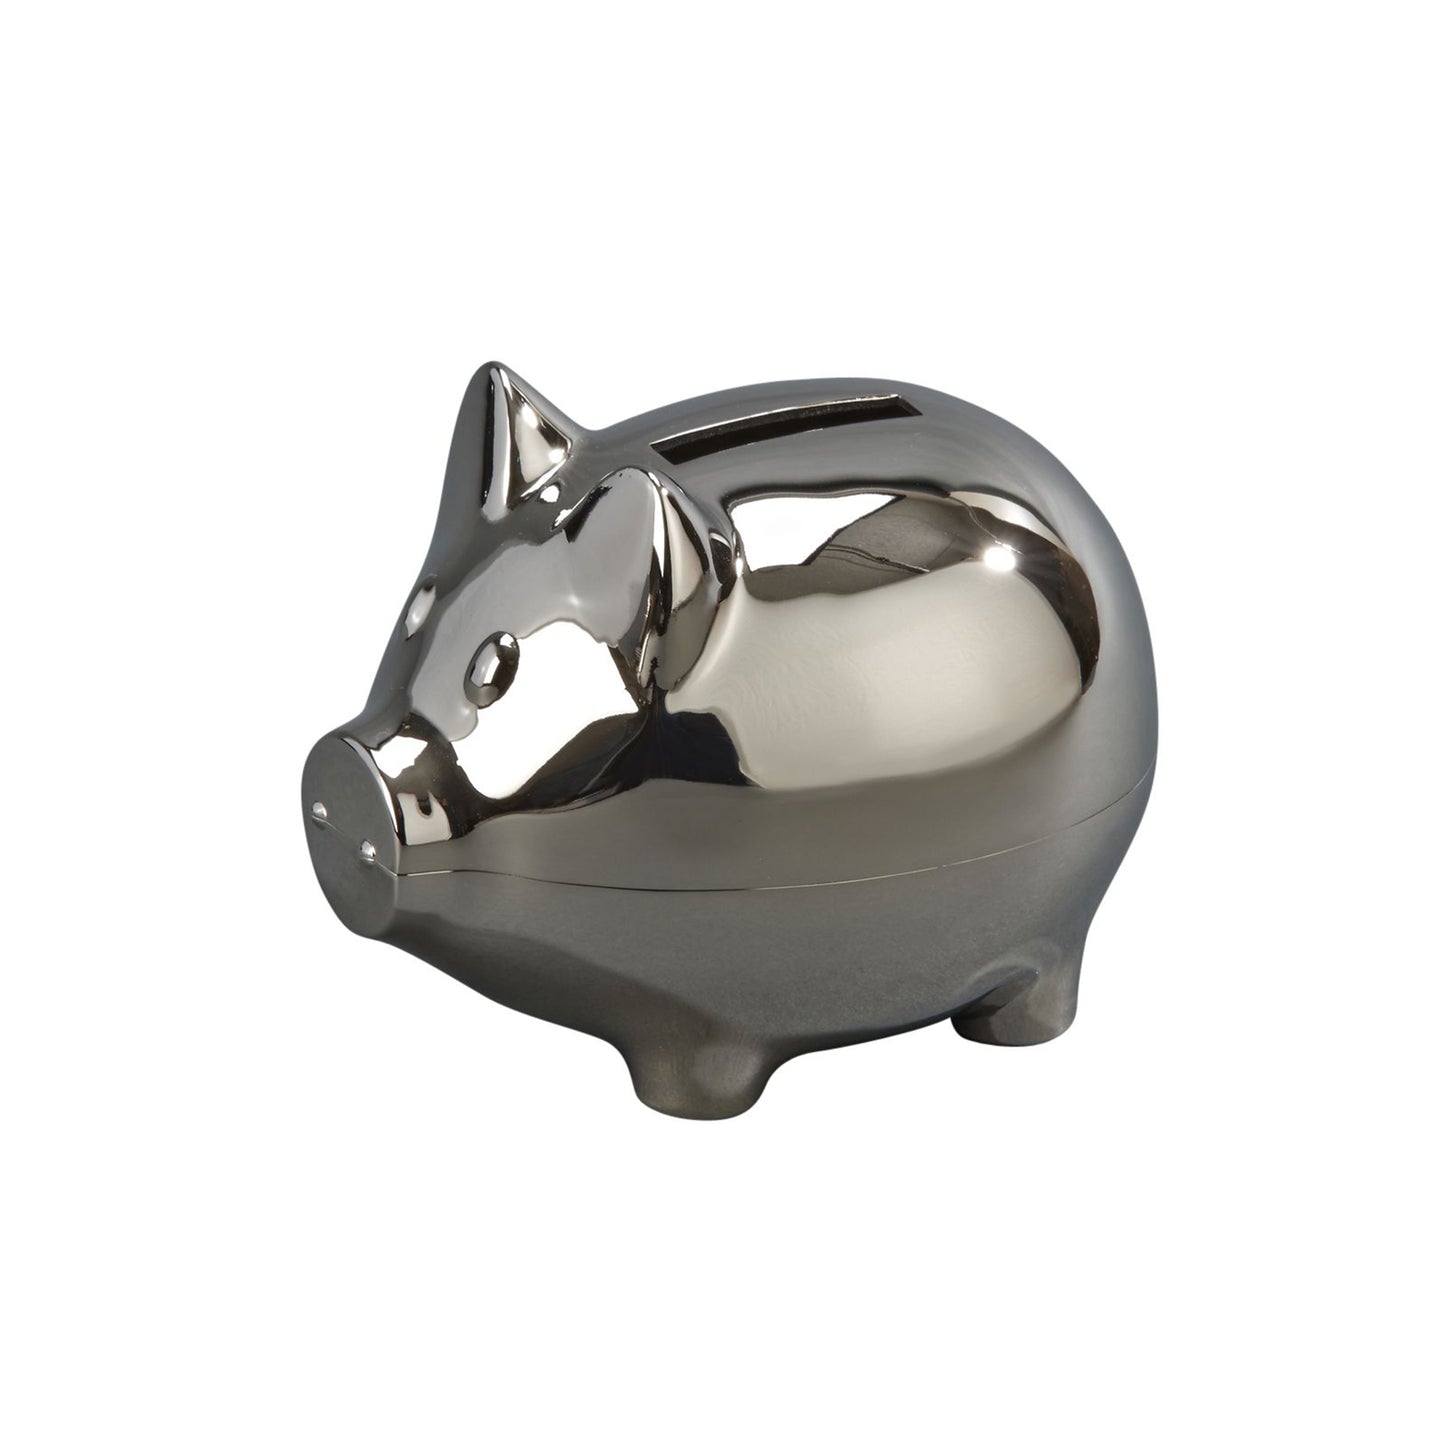 Small Piggy Bank With Polished Finish